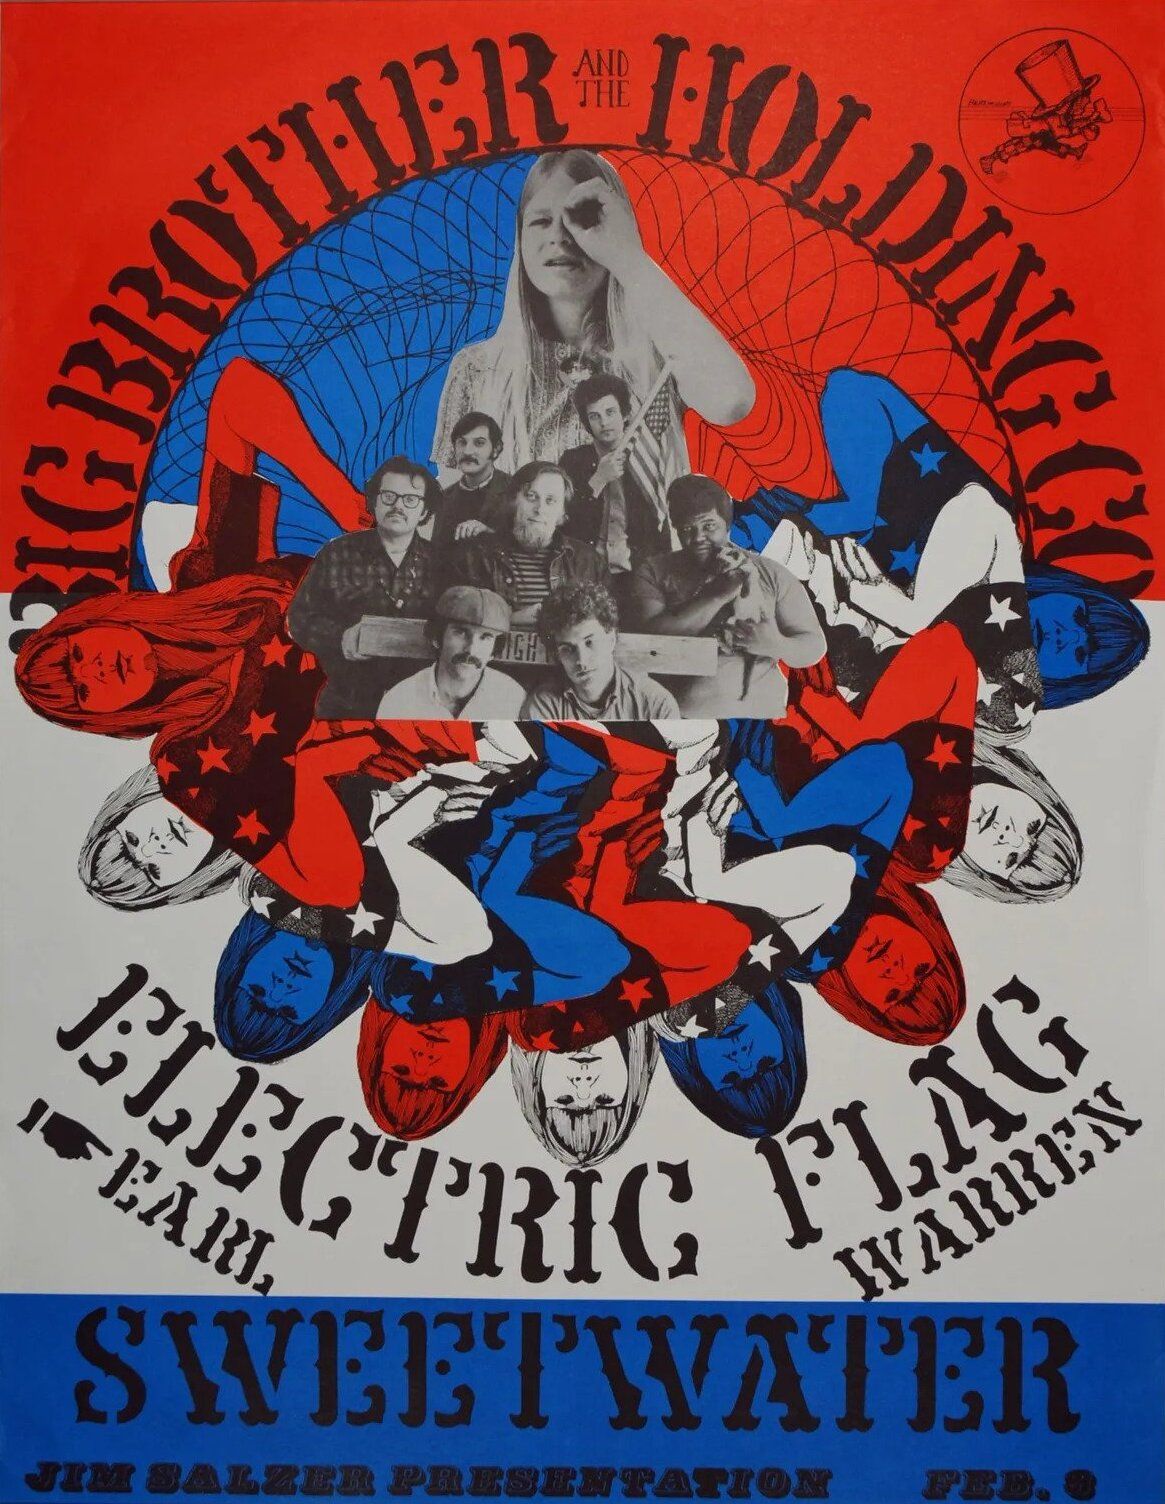 Big Brother and the Holding Company Earl Warren Show Grounds 1968 Concert Poster